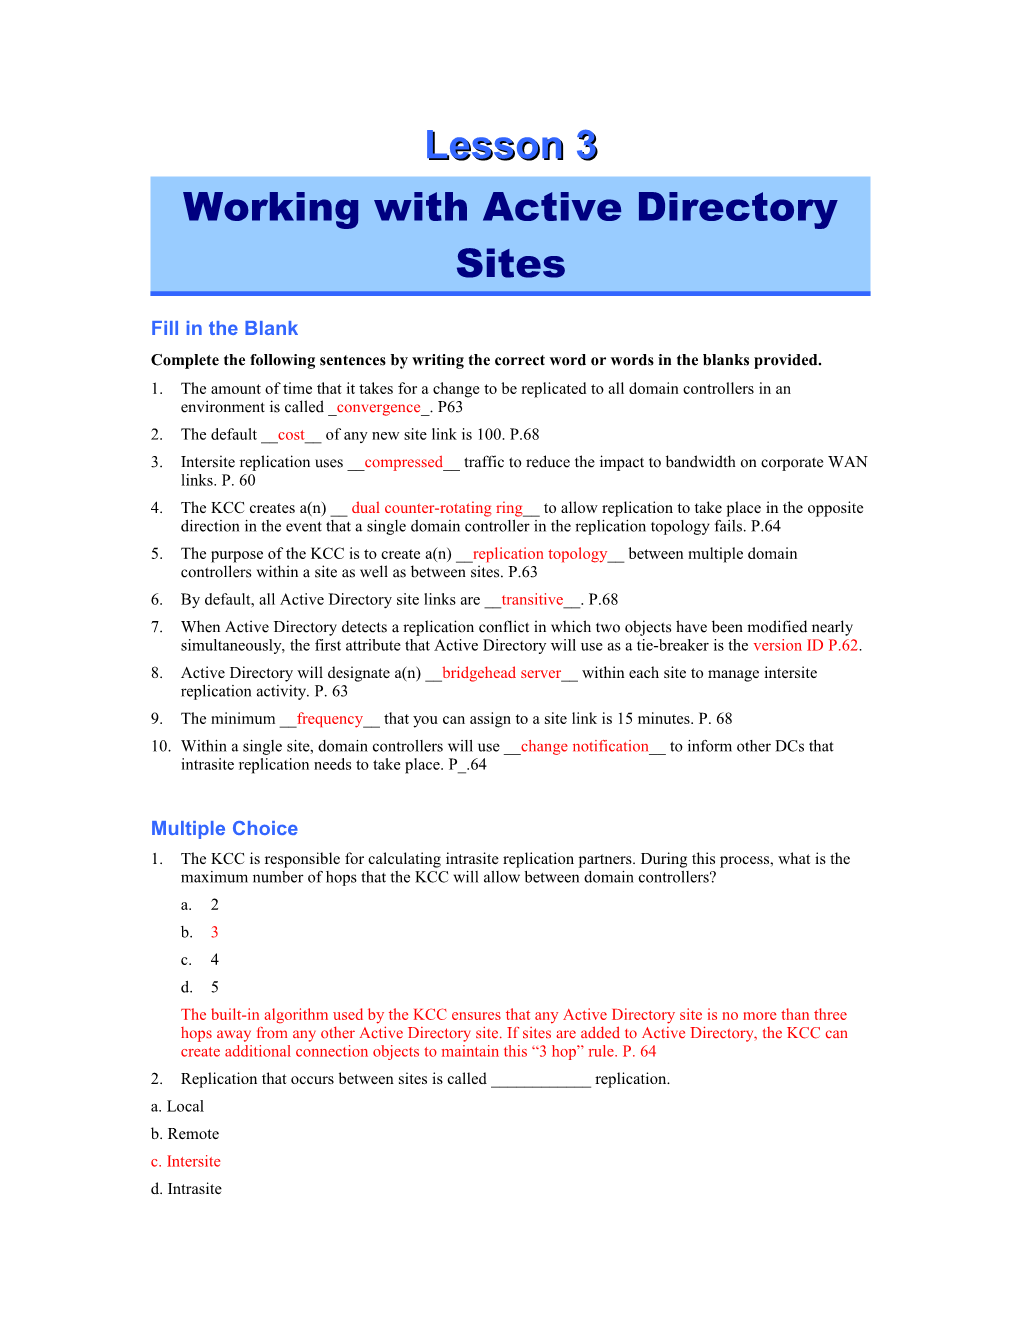 Working with Active Directory Sites